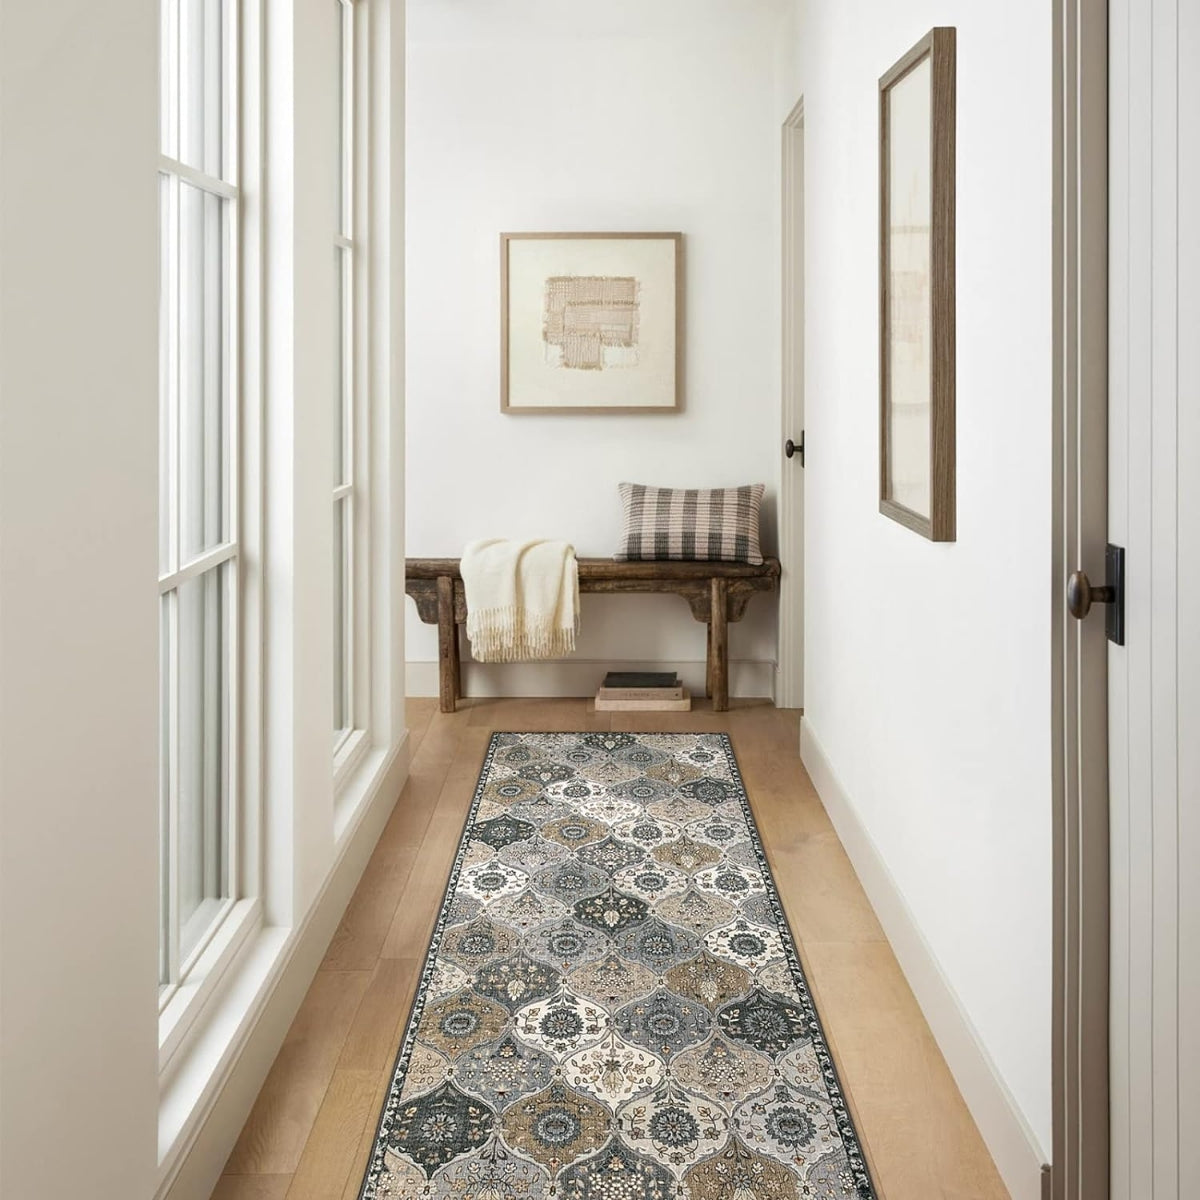  Lahome Floral Washable Indoor Rugs for Entryway - 2x3